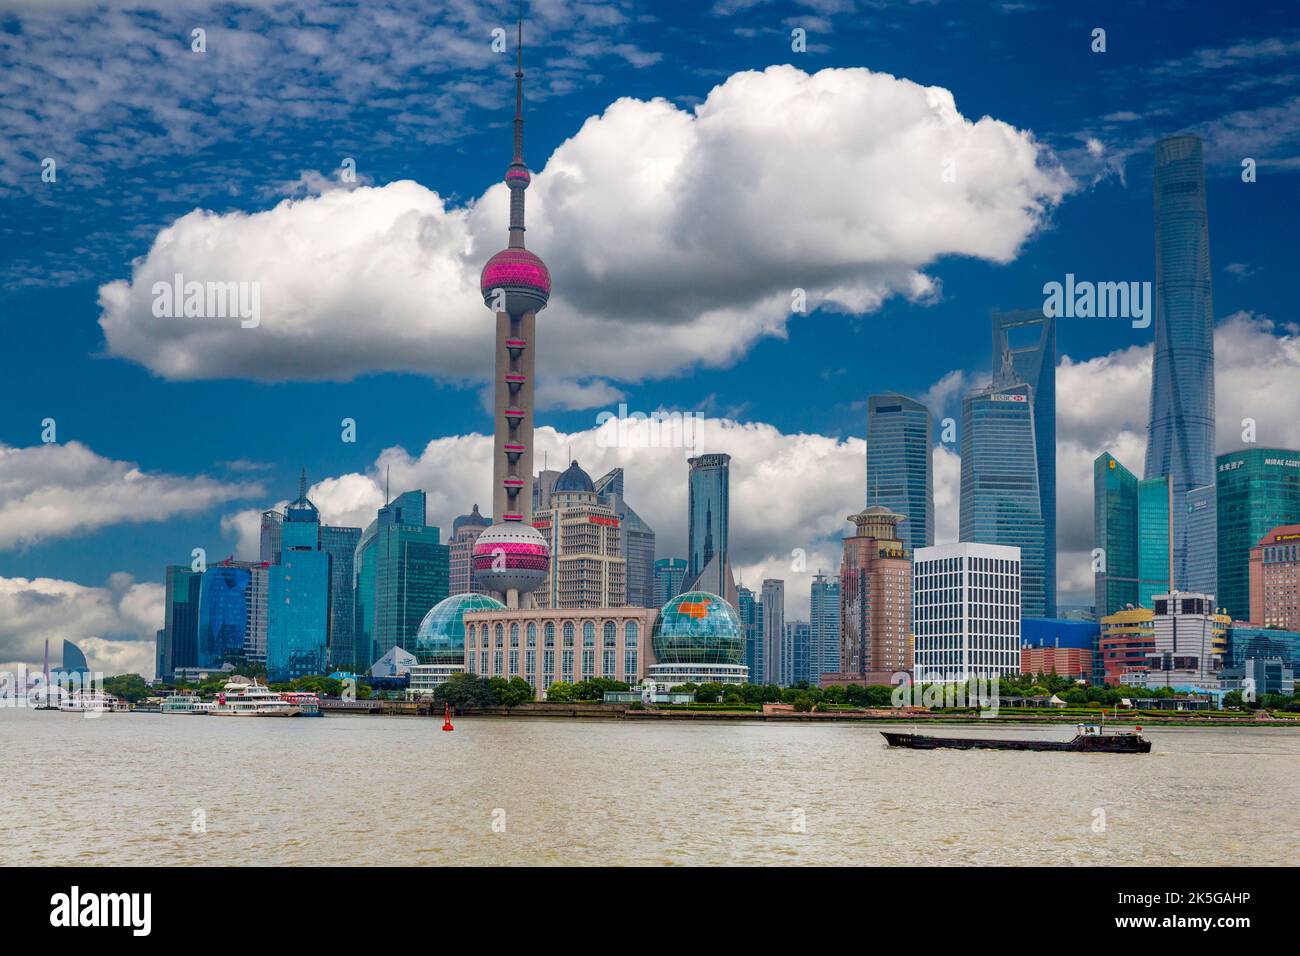 China Shanghai Oriental Pearl Television Tower Pudong District Across The River Huangpu 1563